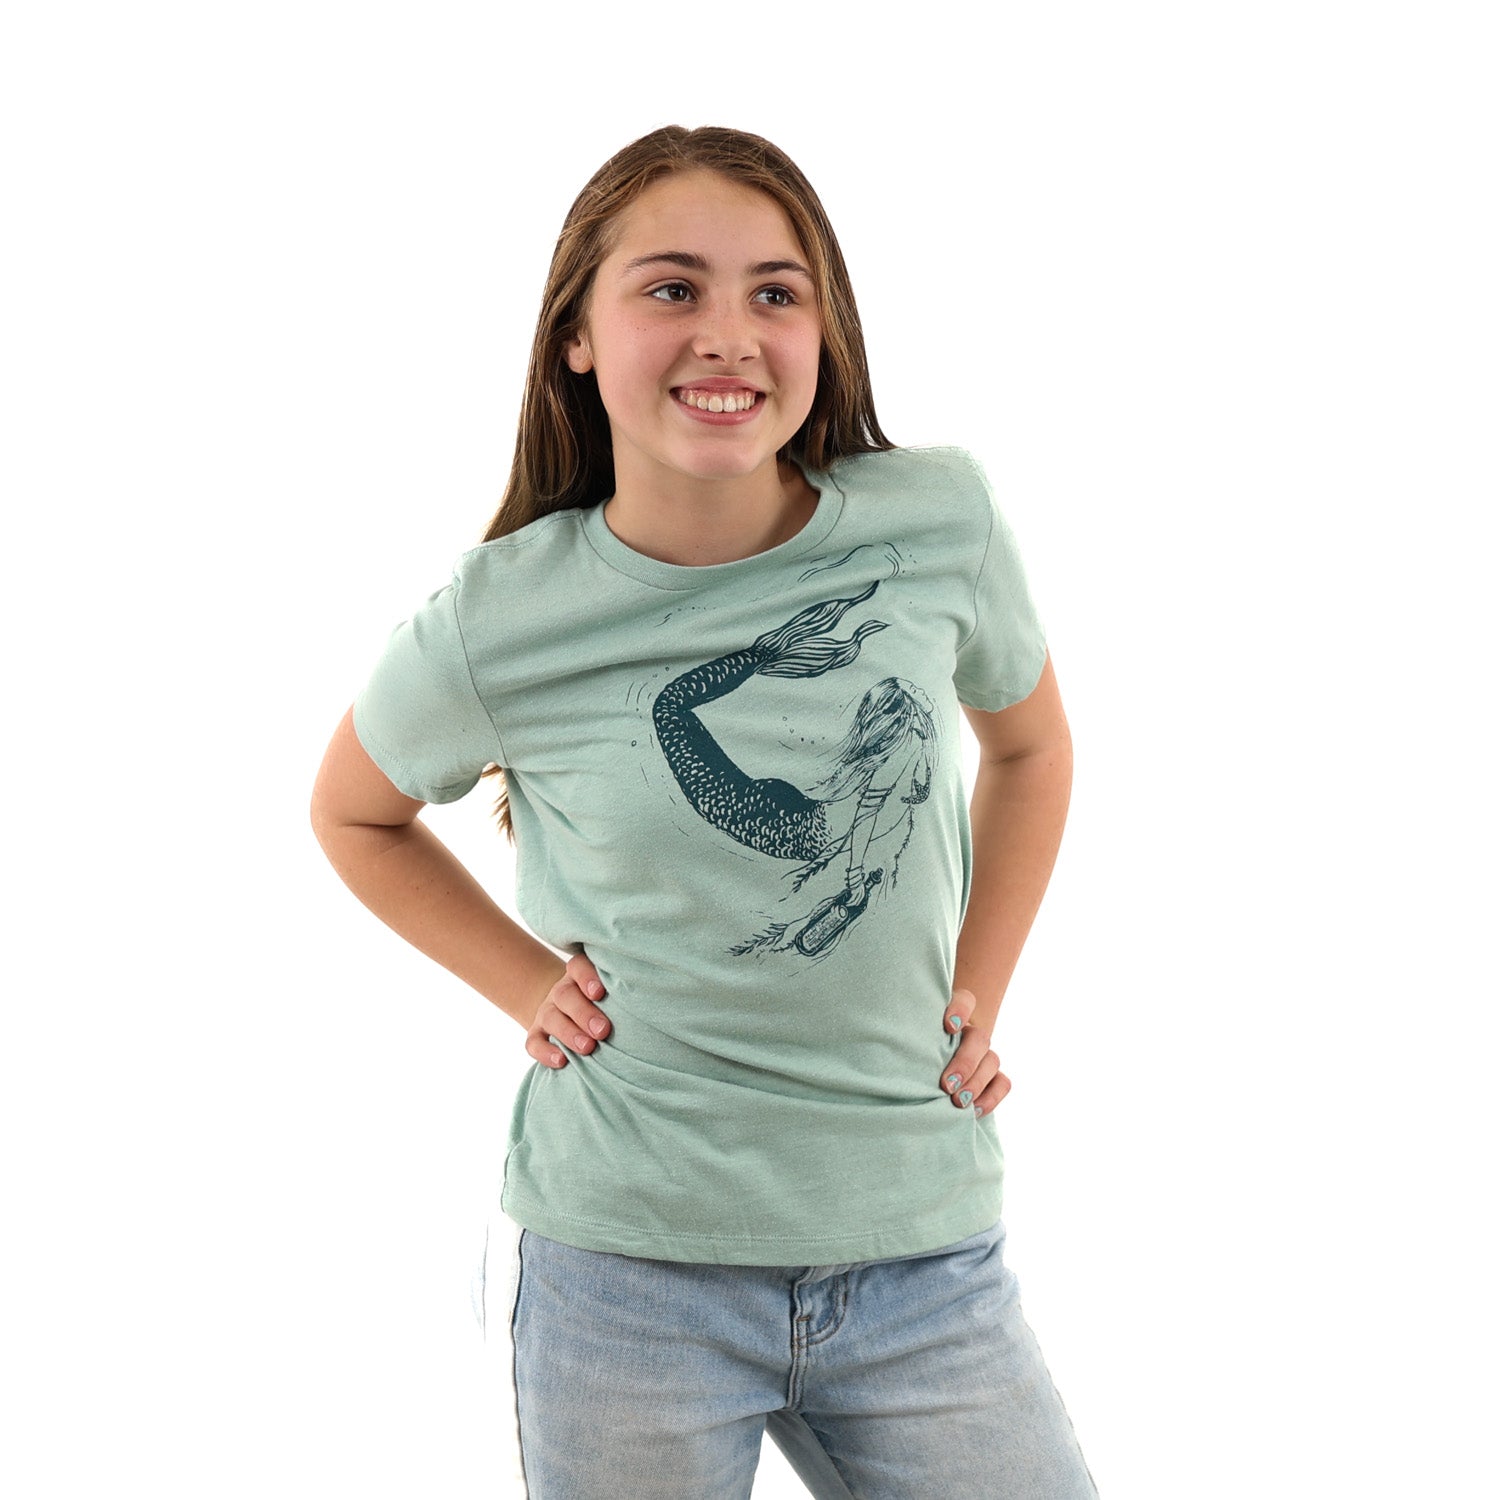 Girl wearing light green t shirt with a mermaid printed in green ink